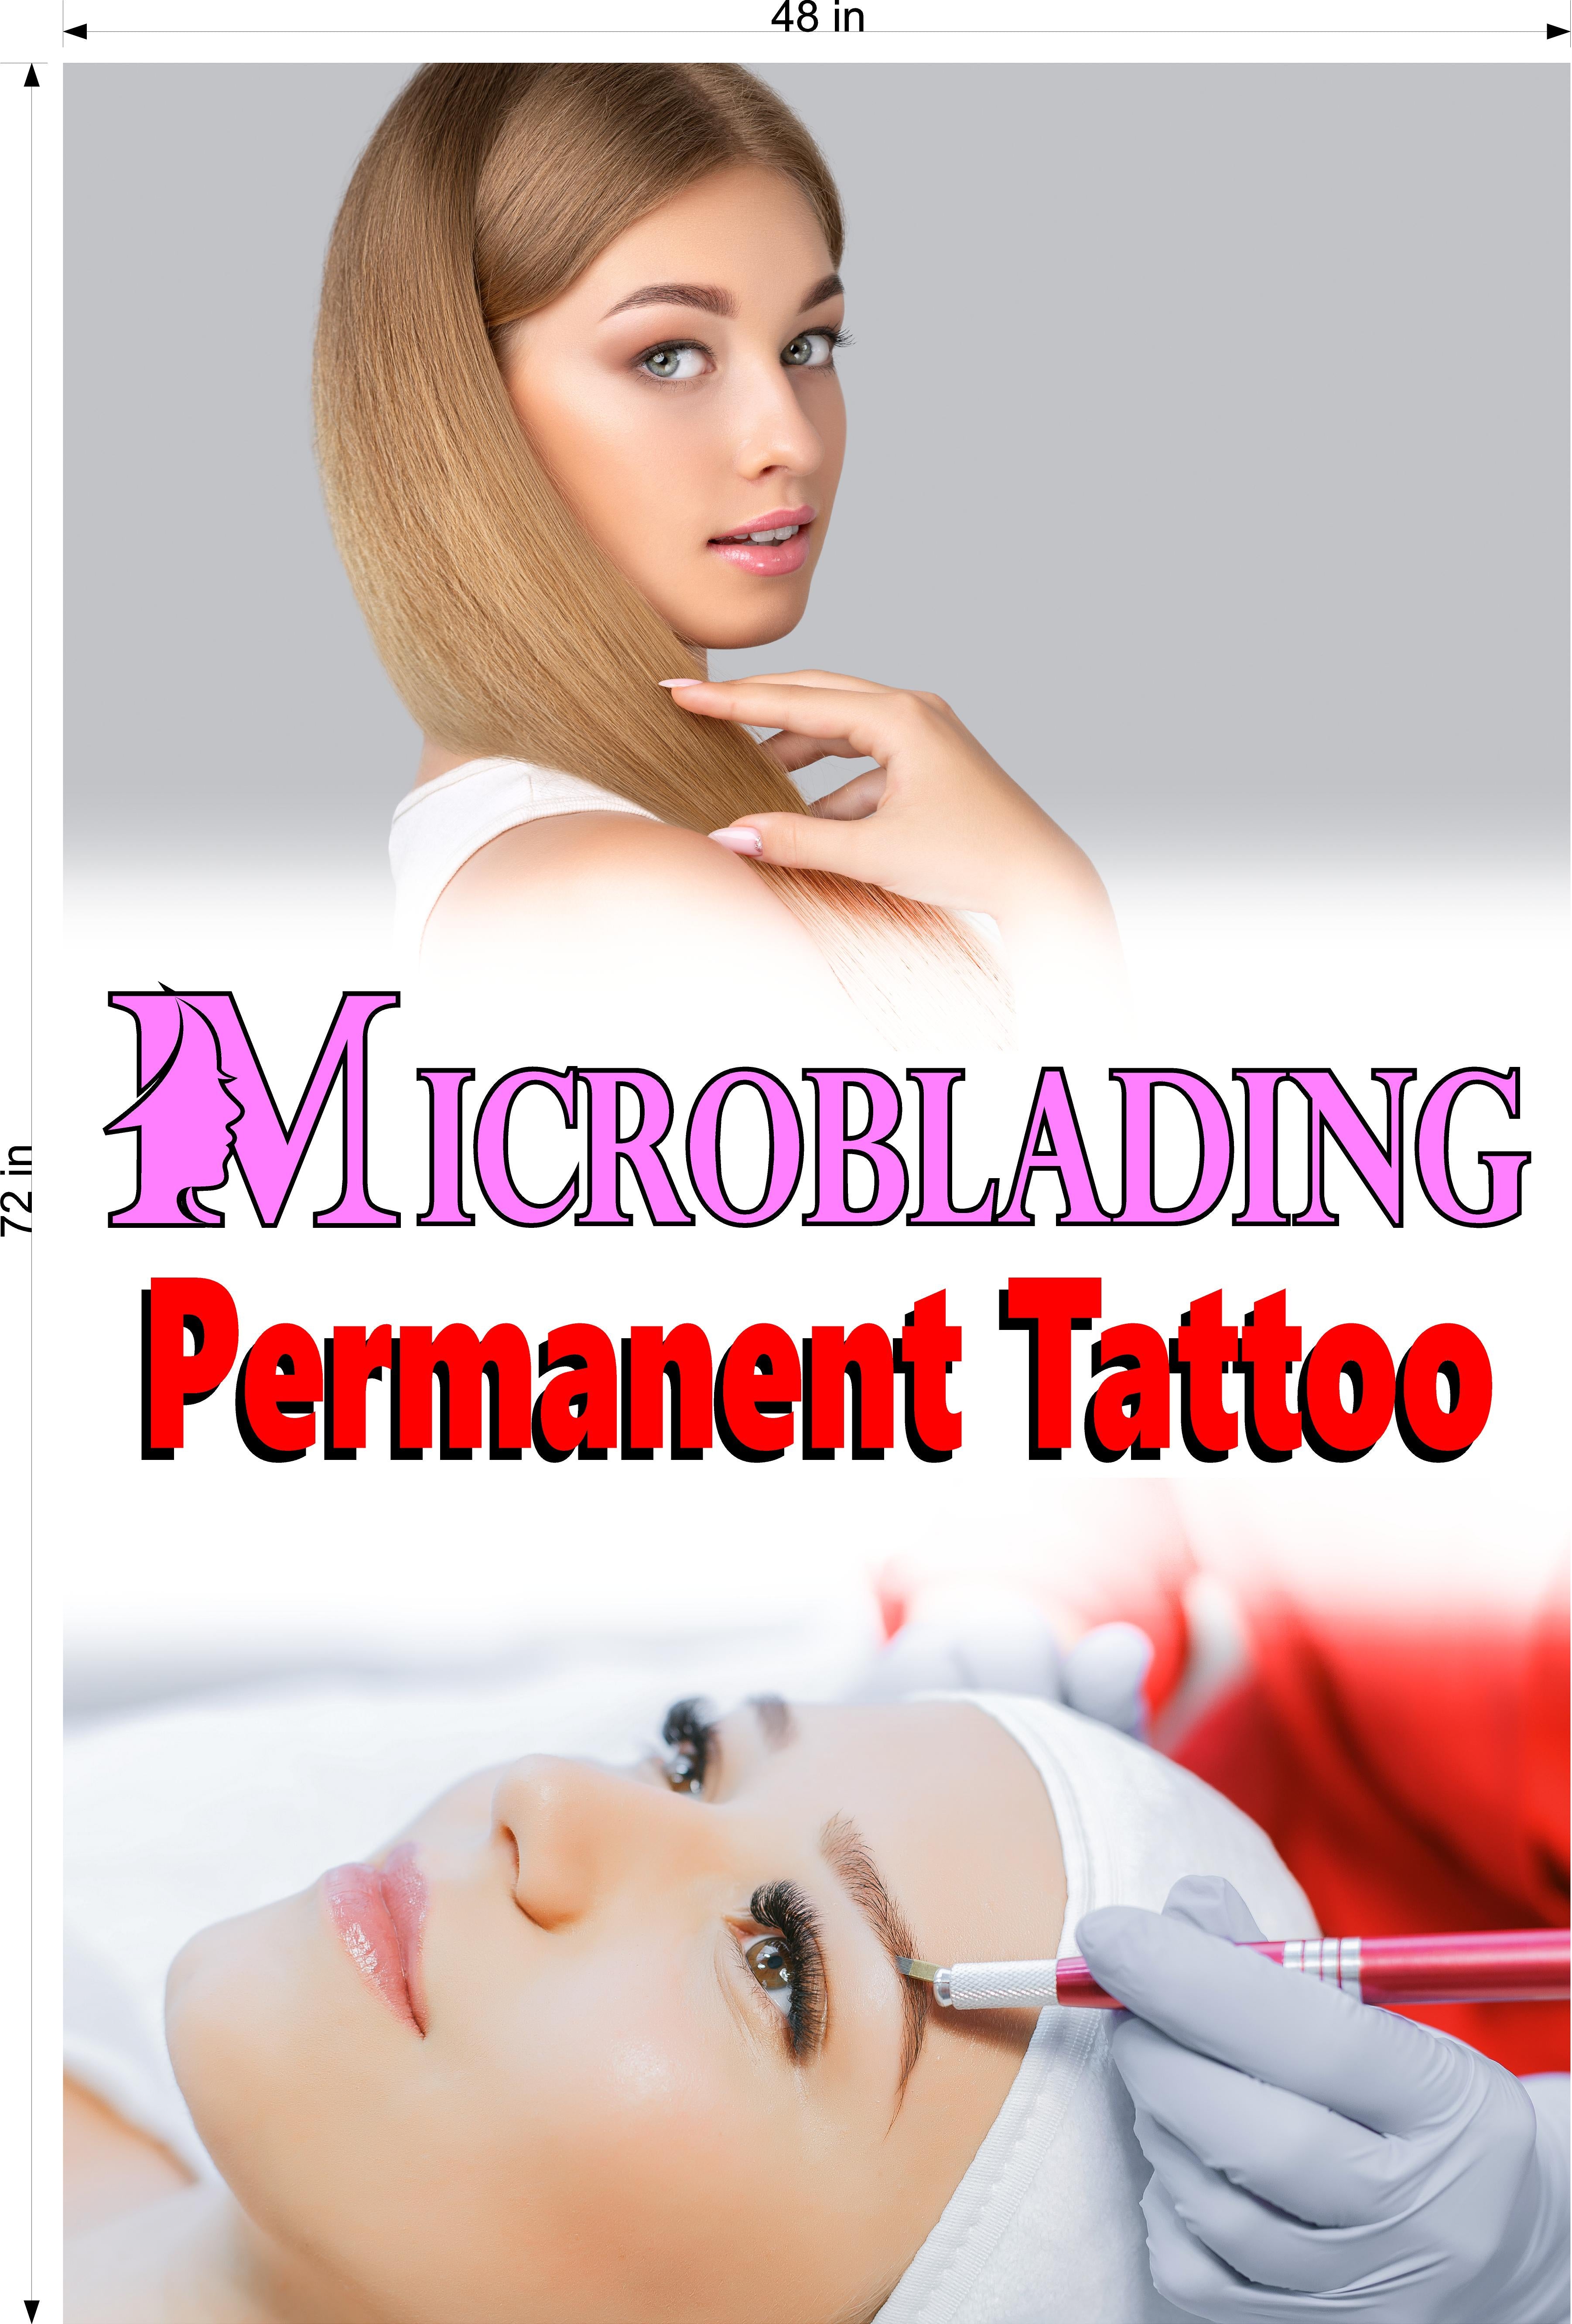 Microblading 14 Photo-Realistic Paper Poster Non-Laminated Permanent Vertical